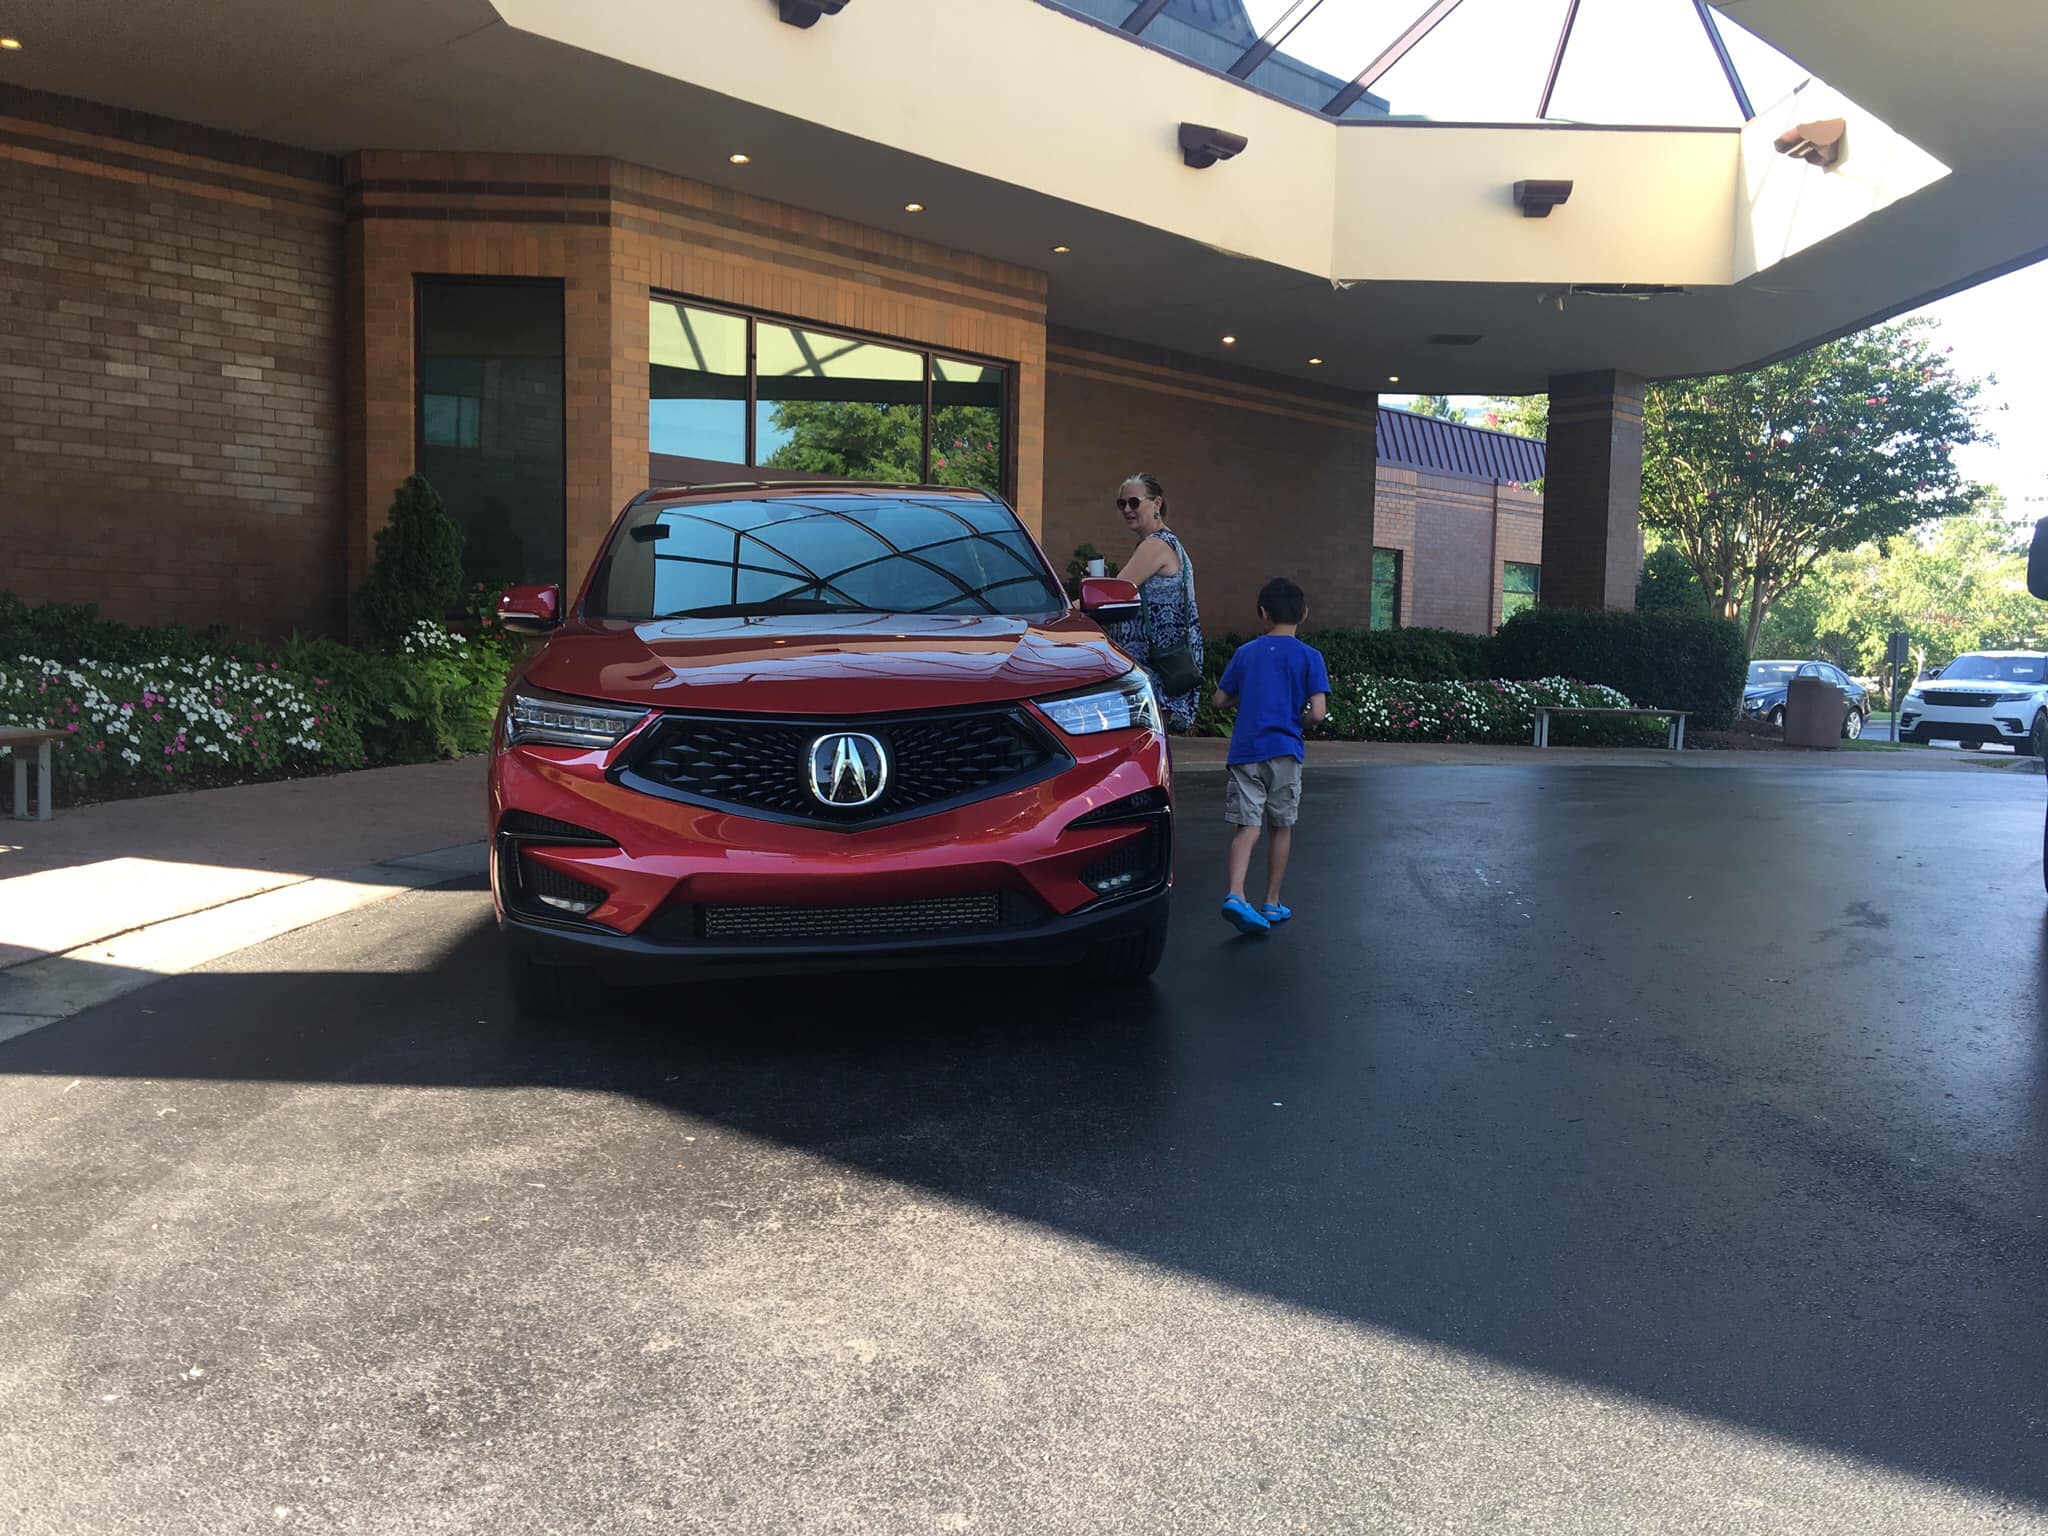 The 2020 Acura RDX is the ultimate in luxury SUVs